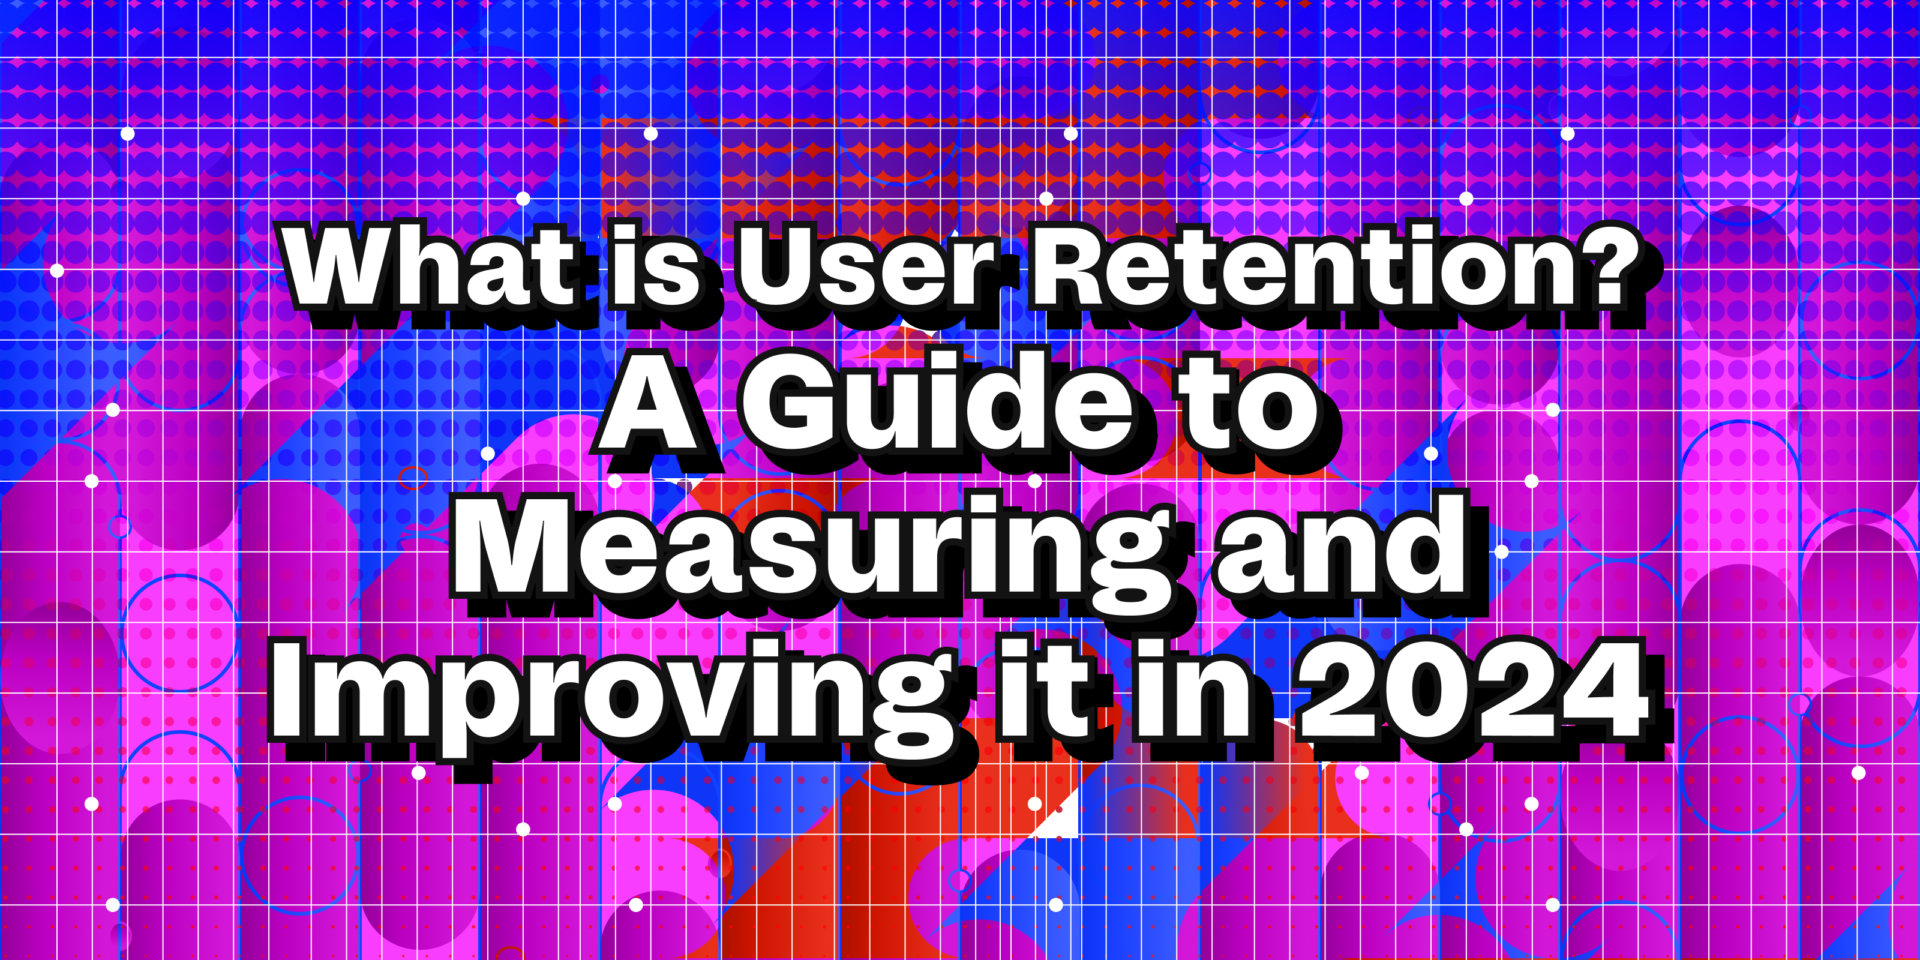 What is User Retention? A Guide to Measuring and Improving it